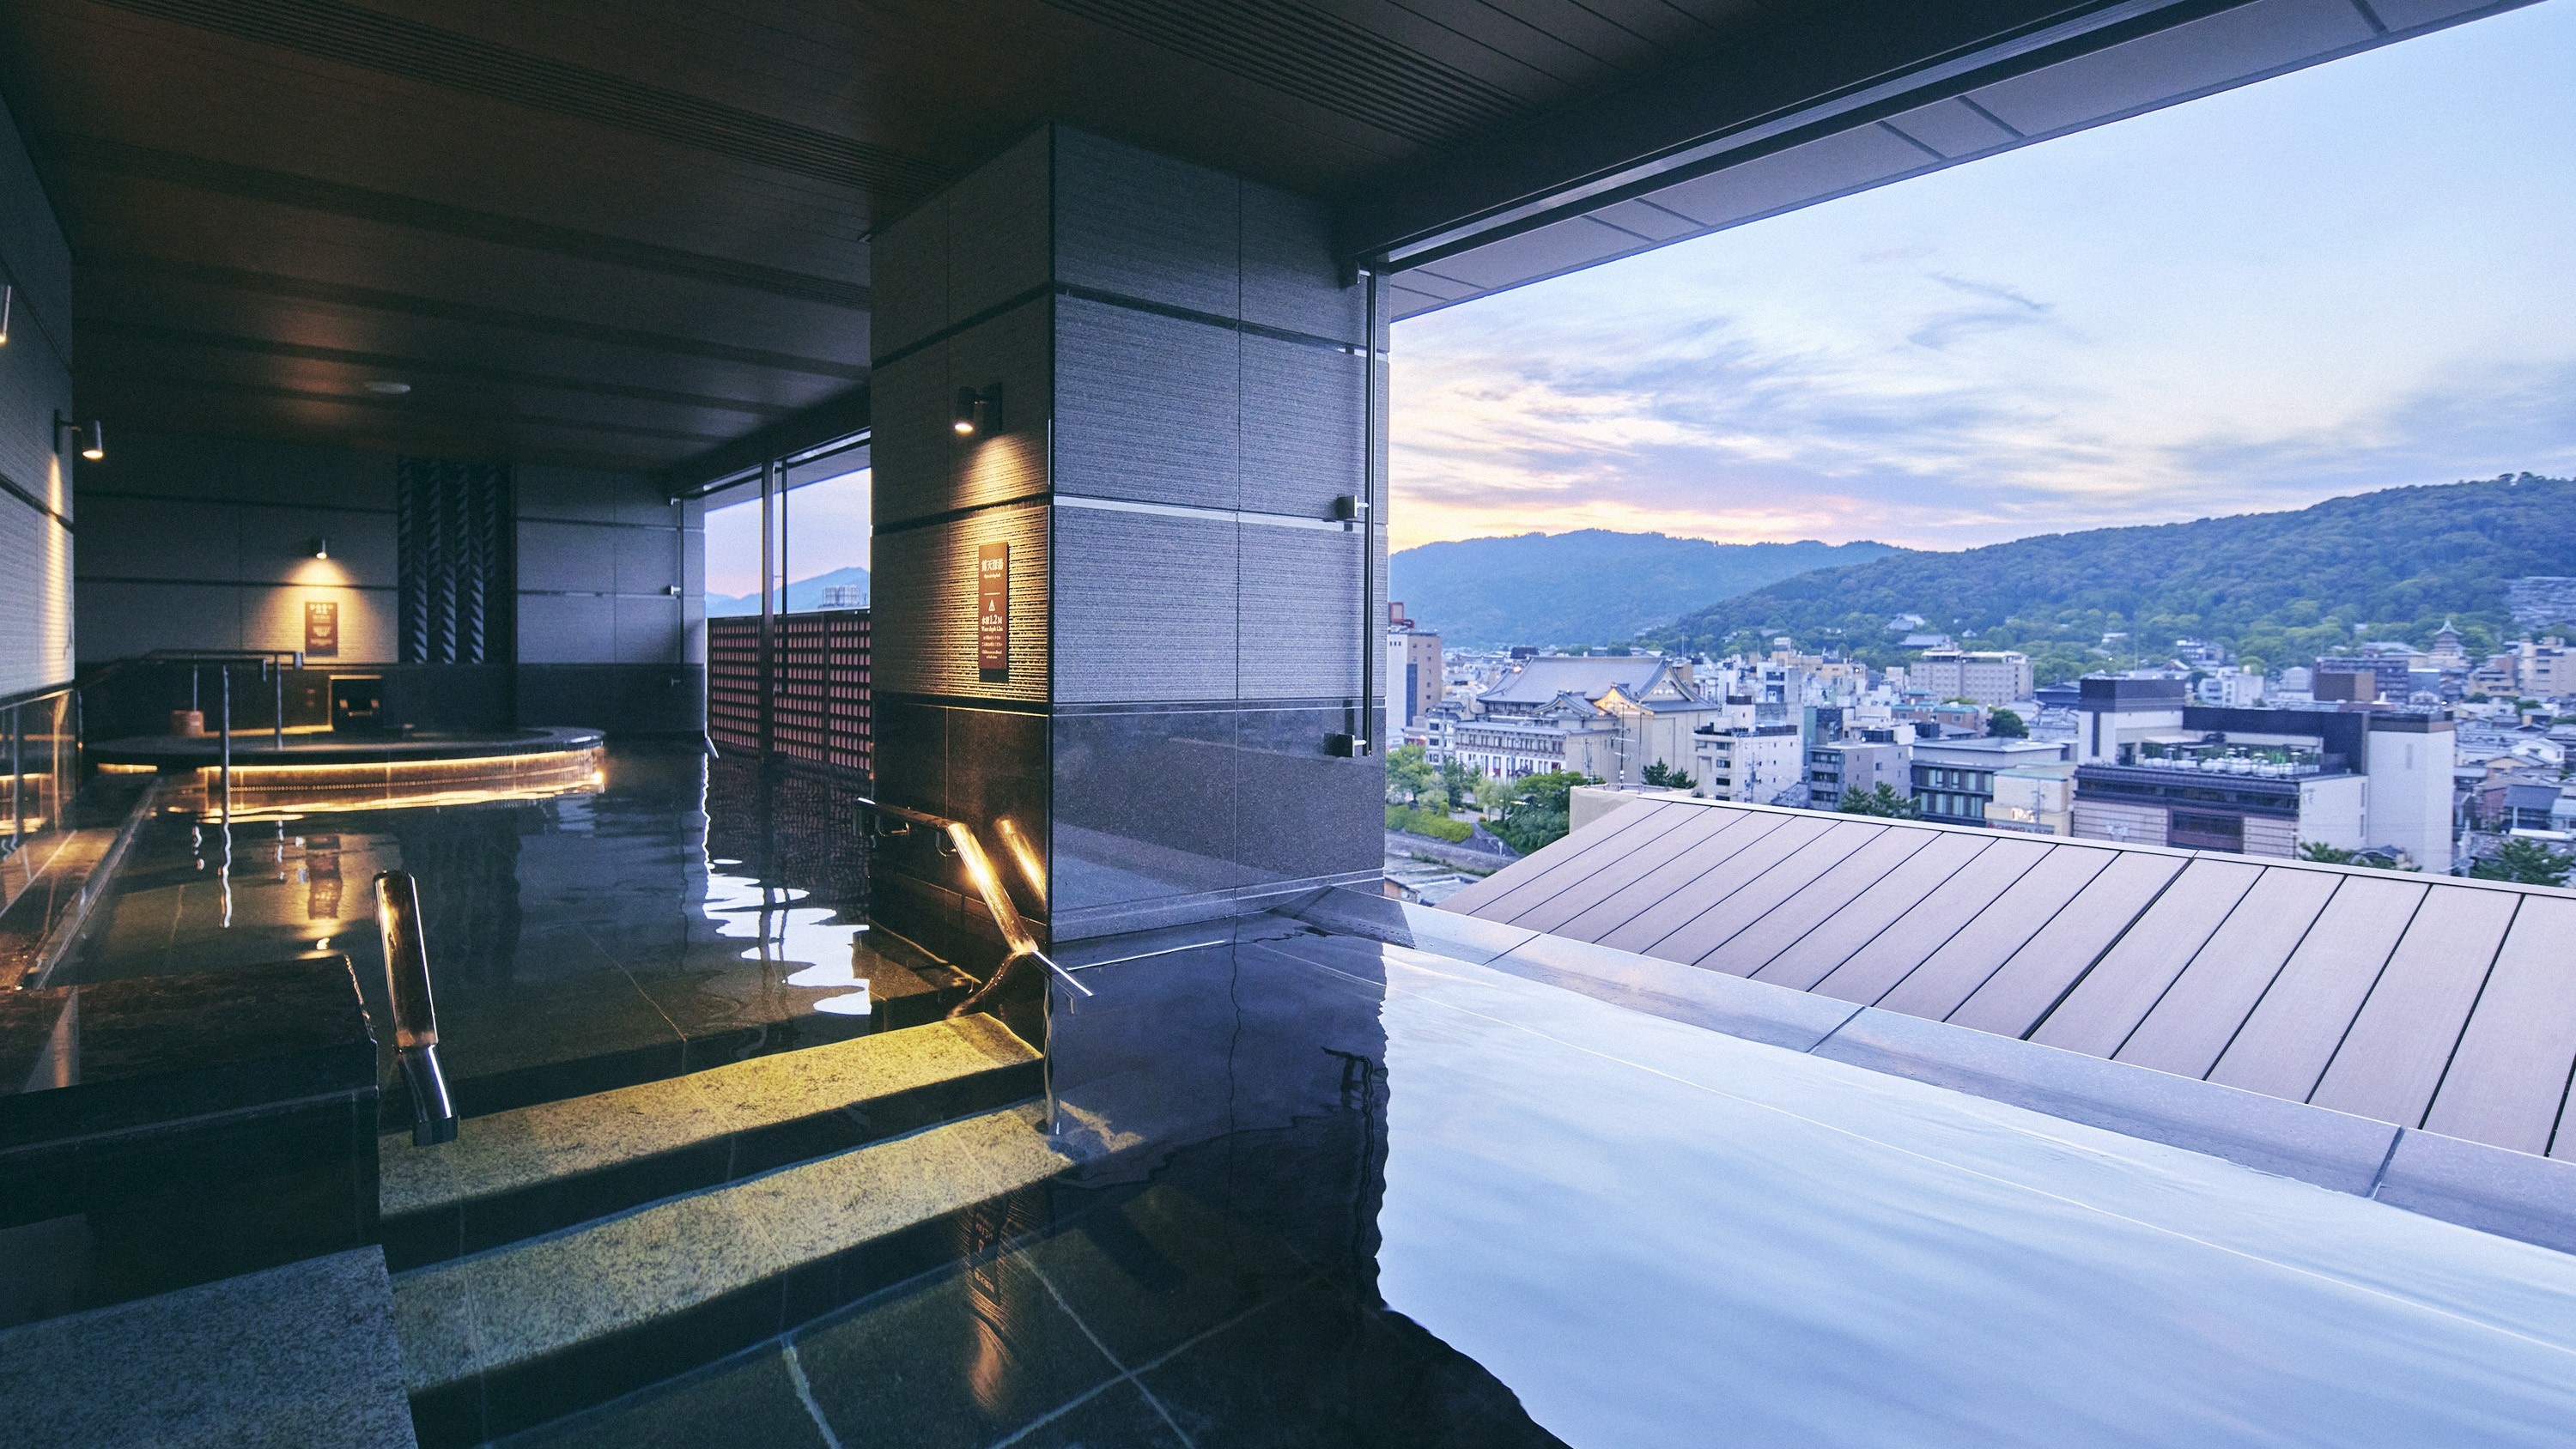 You can take a standing bath in Yasaka-no-yu, a deep bath with a depth of 1m20cm. Feel the water pressure throughout your body and relax with a massage effect.